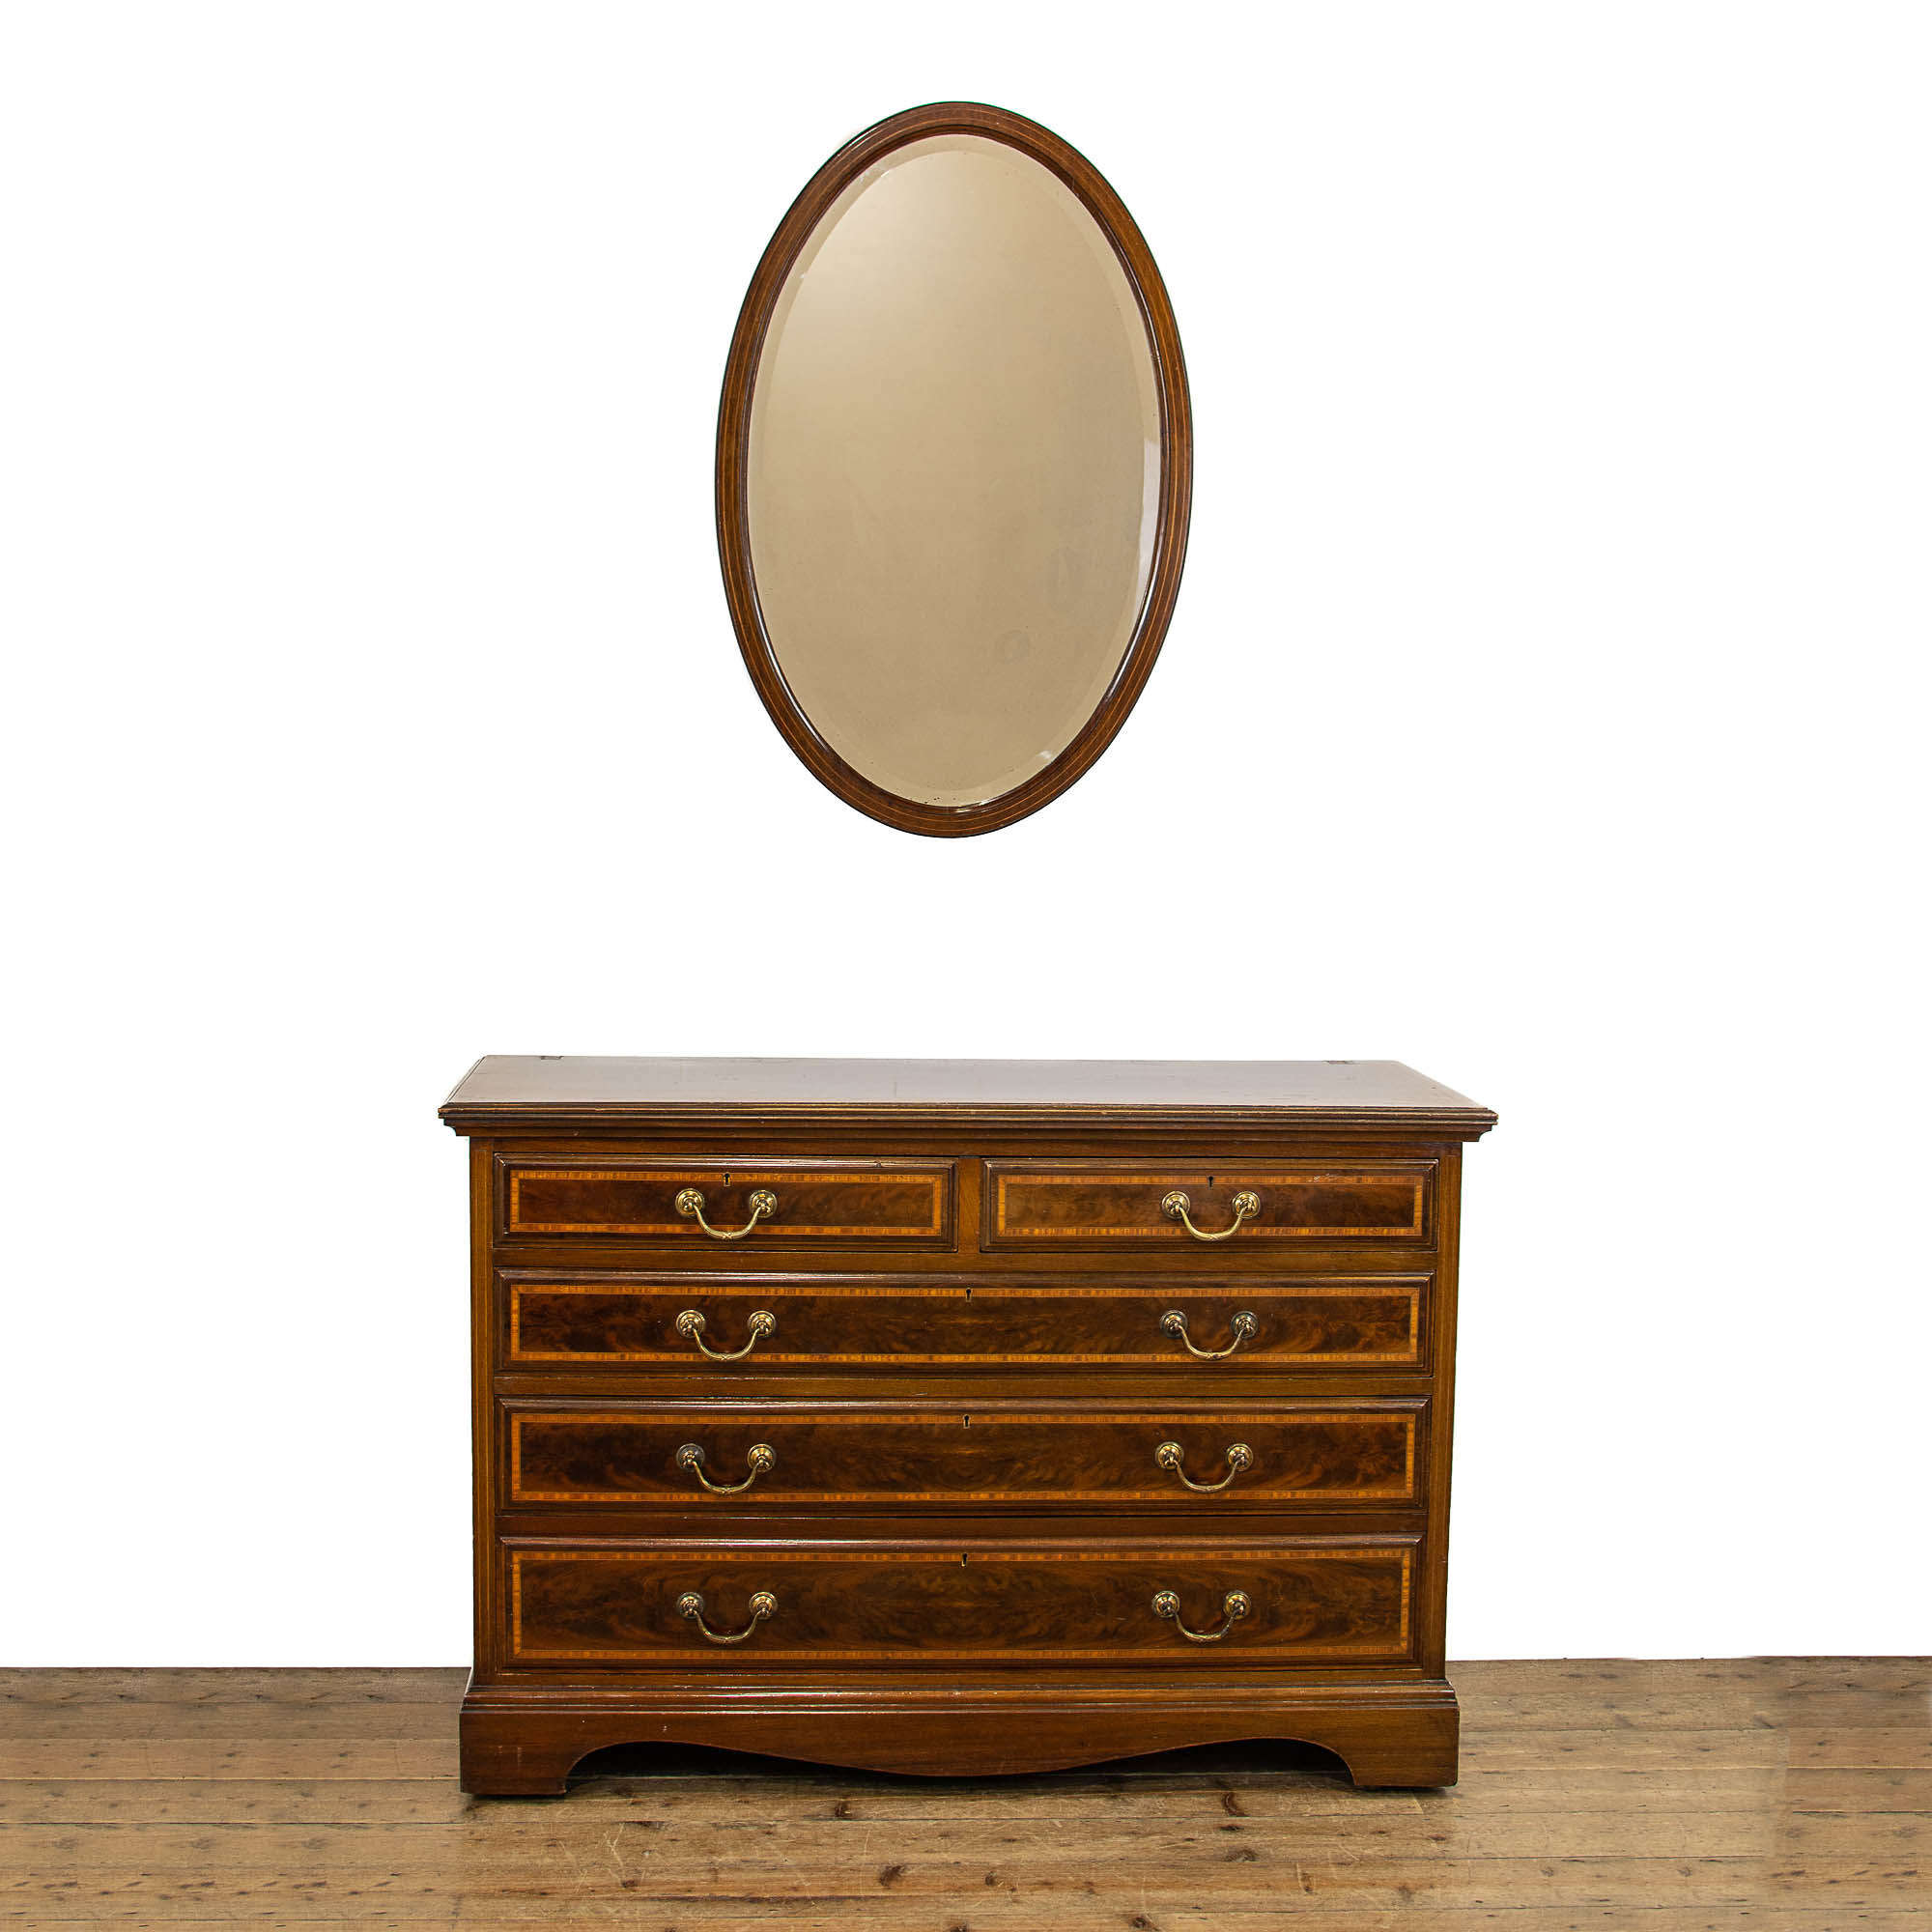 Edwardian Inlaid Mahogany Chest of Drawers with Matching Mirror